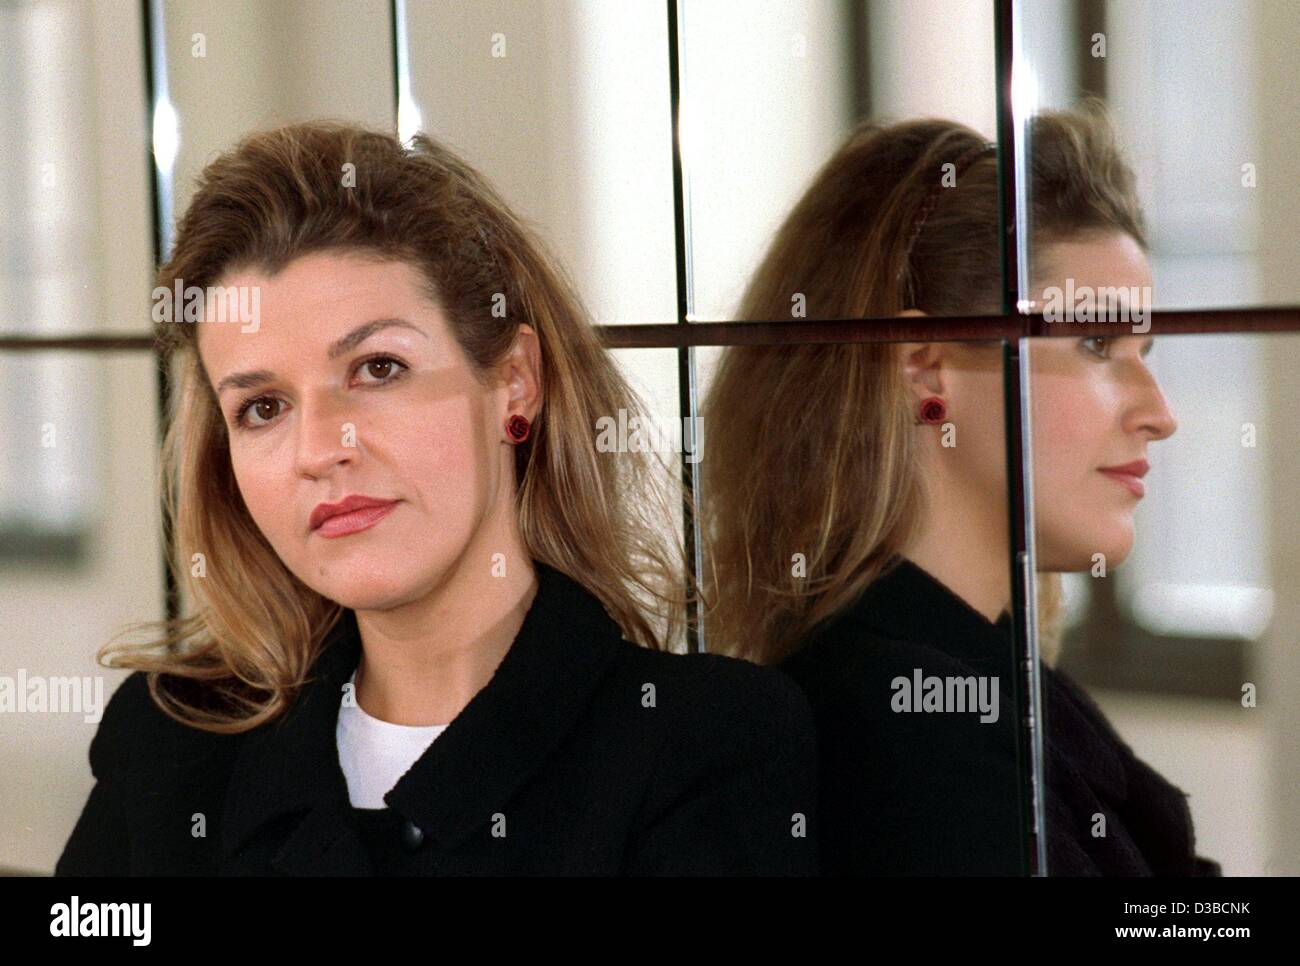 (dpa files) - Classical violinist Anne-Sophie Mutter poses in front of a mirror in Frankfurt, 1 November 1999. Born in 1963 in Rheinfelden, Germany, she started her international career at the tender age of 13 when conductor von Karajan gave her the chance to perform as soloist at the Salzburg Conce Stock Photo